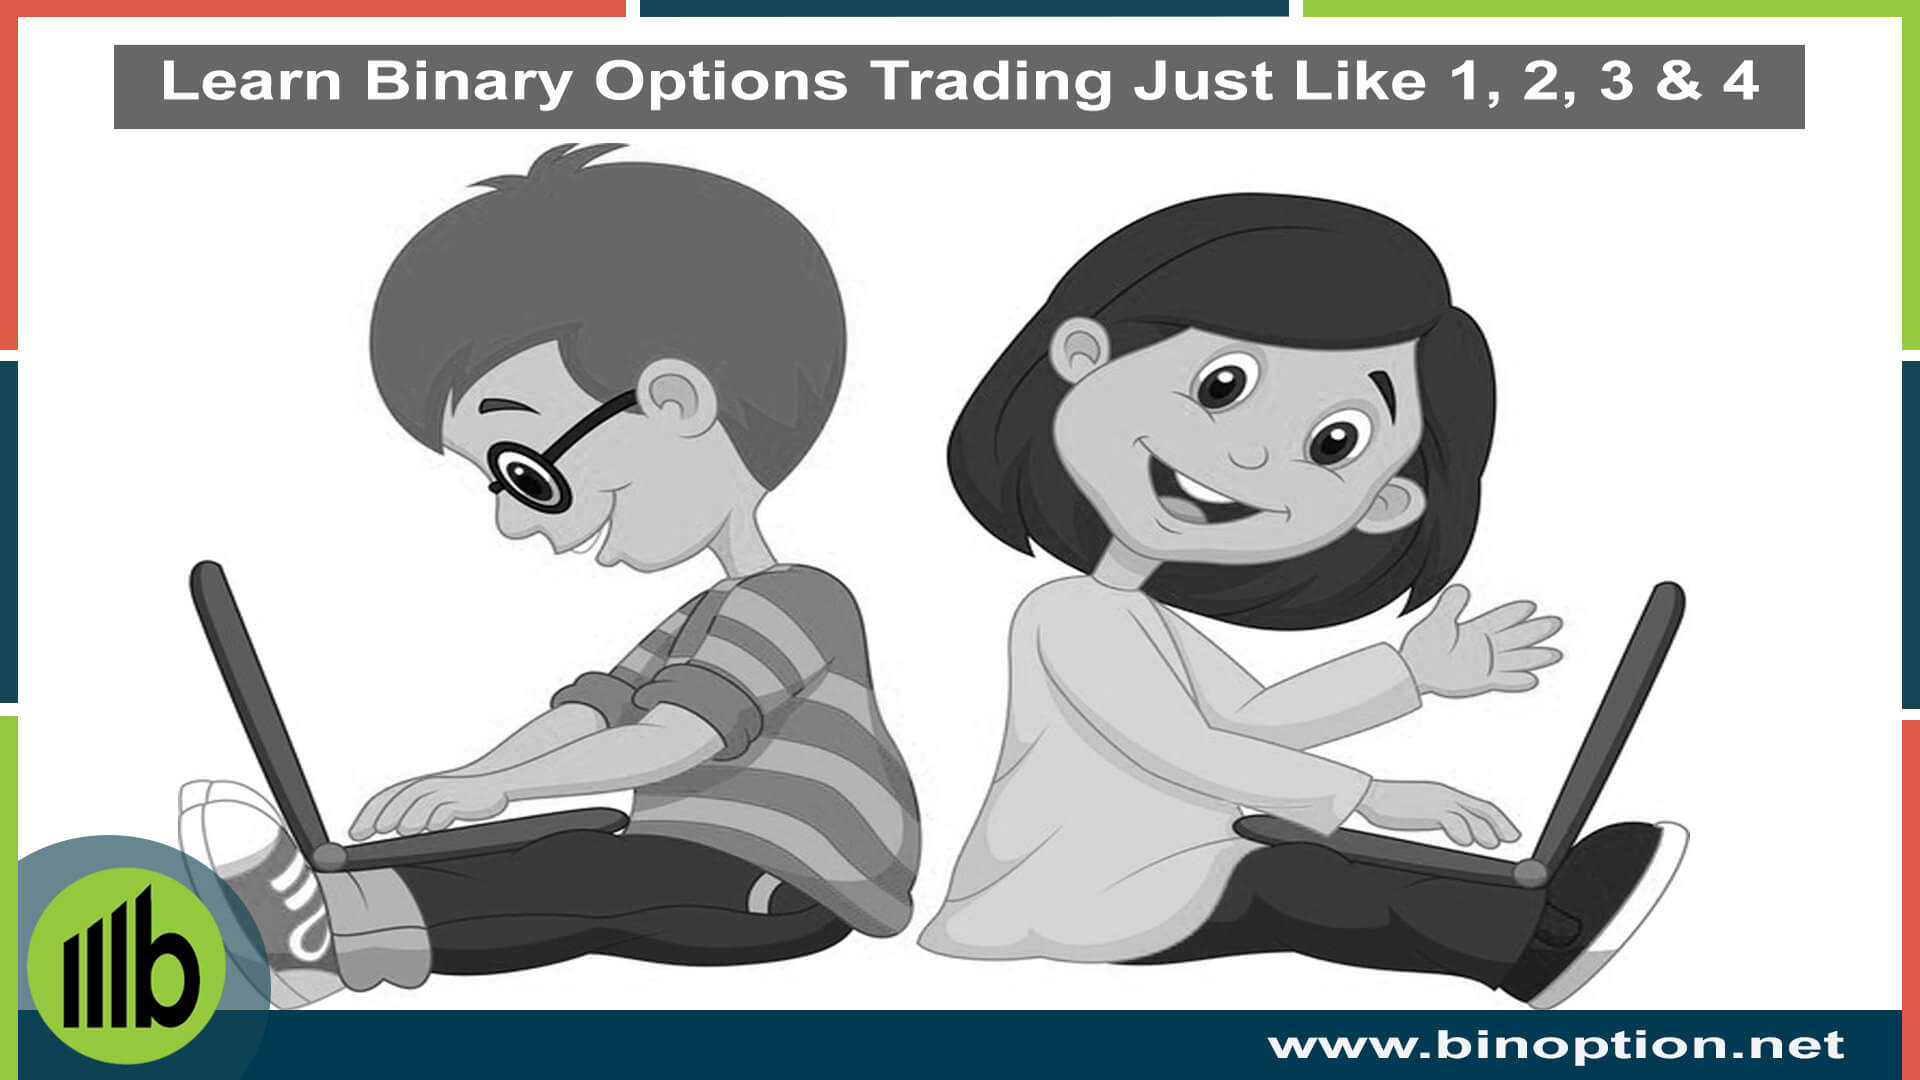 Best site to learn binary options